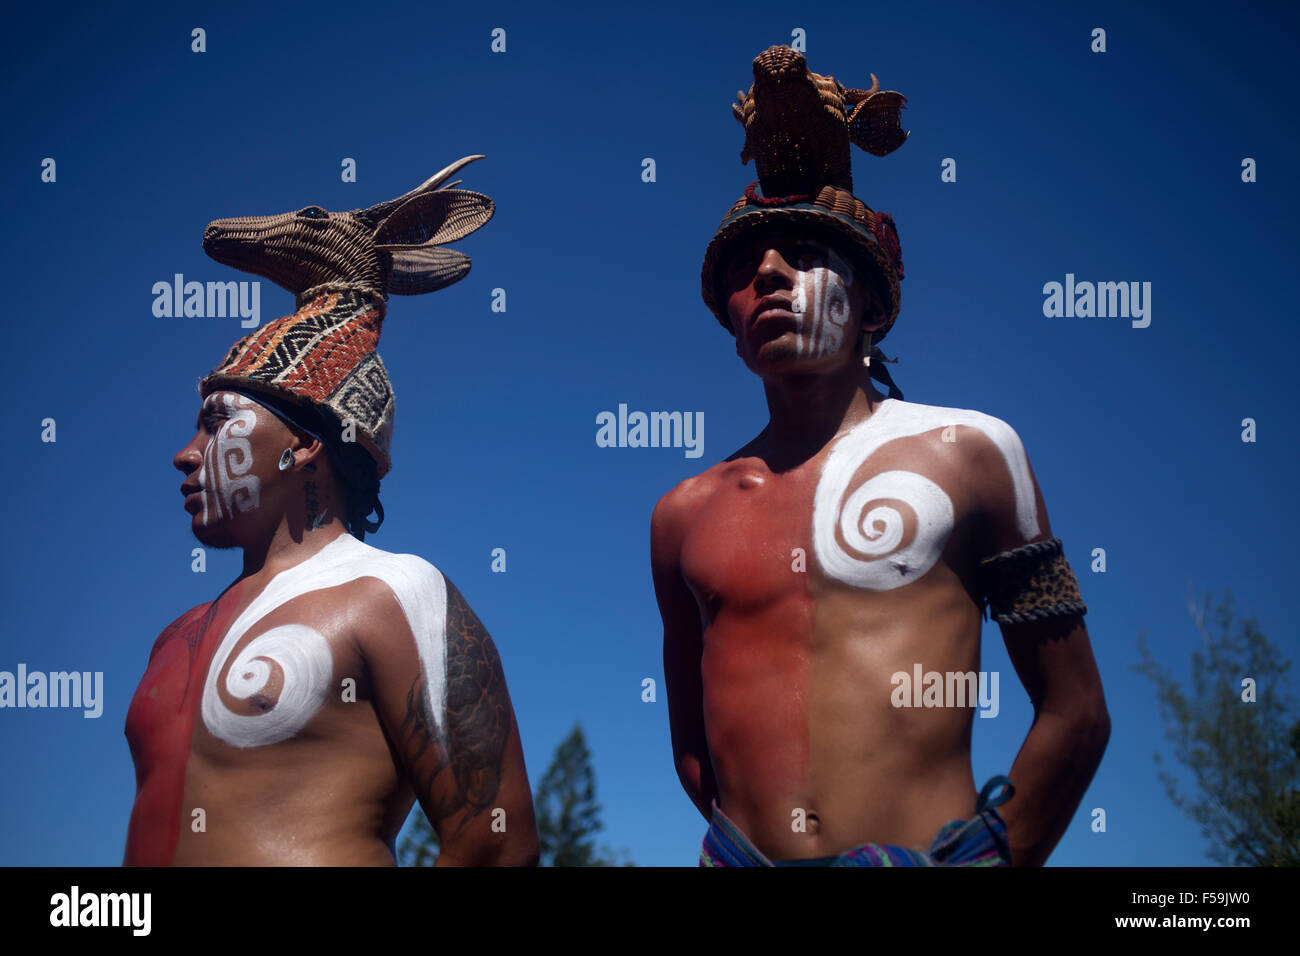 A Mayan Ball Player at the first ¨Pok Ta Pok¨ World Cup in Piste, Tinum, Yucatan, Mexico, September 19, 2015 Stock Photo